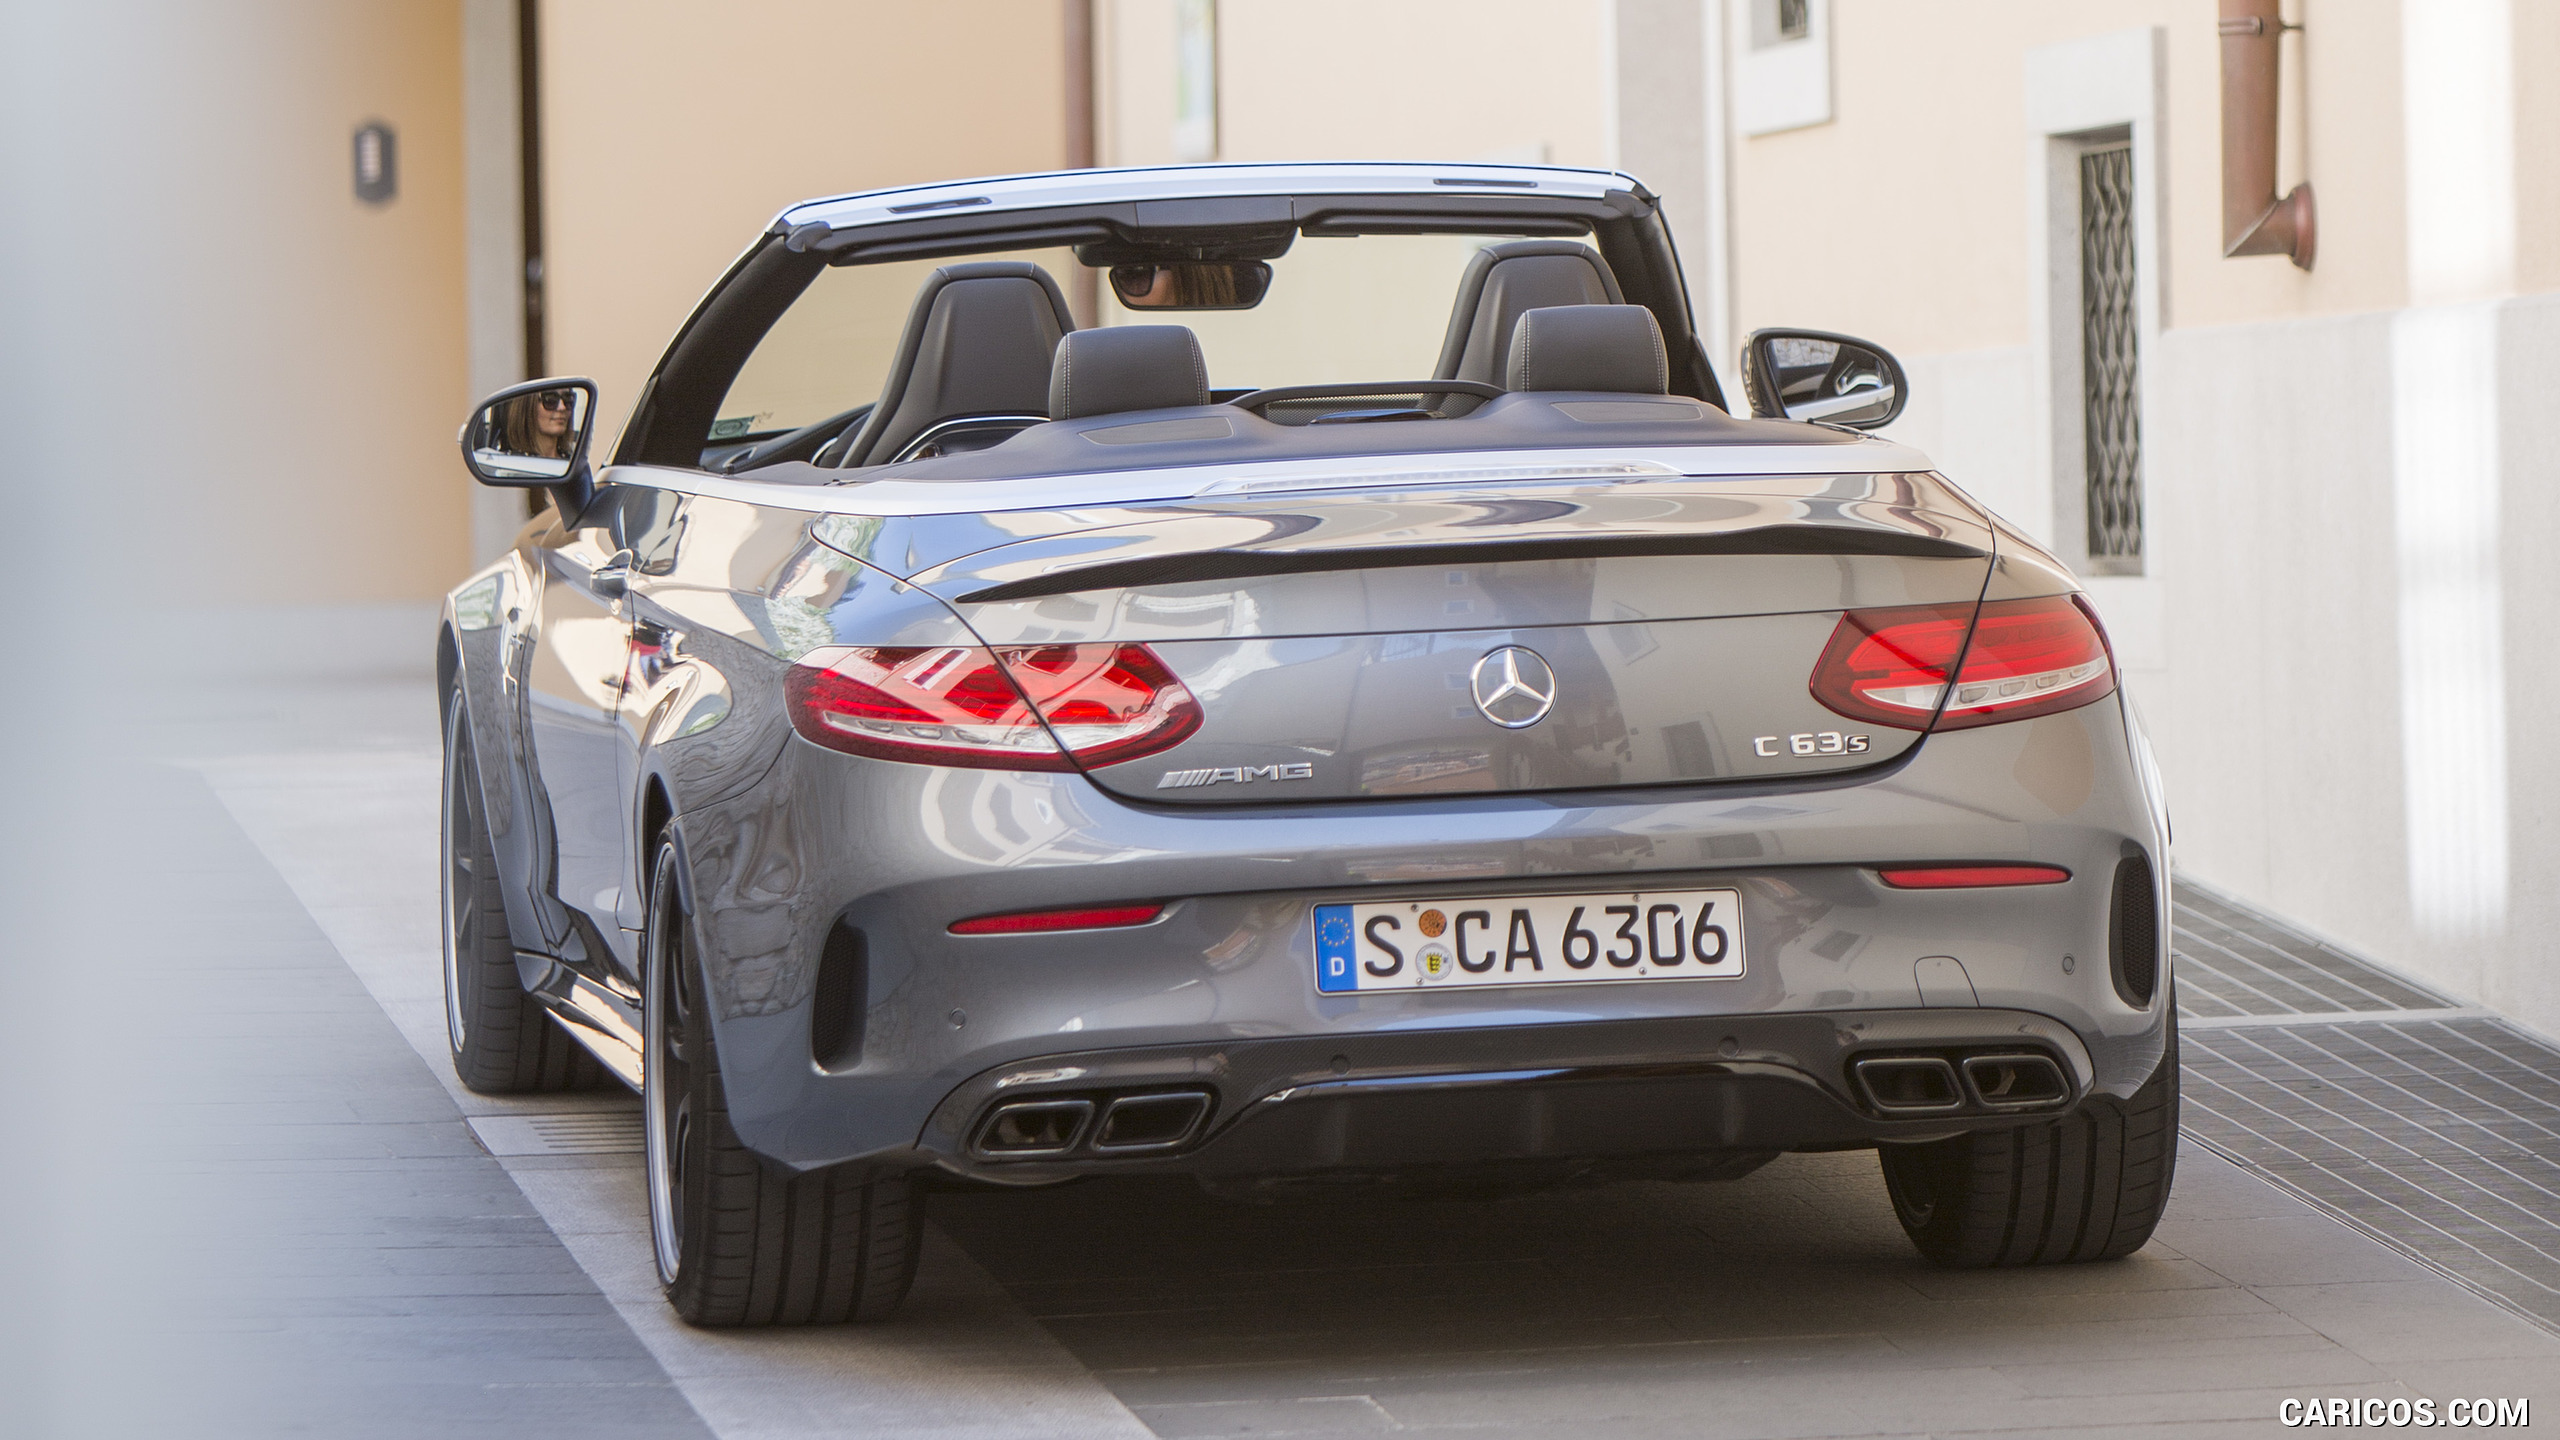 2017 Mercedes-AMG C63 S Cabriolet - Rear, #51 of 222